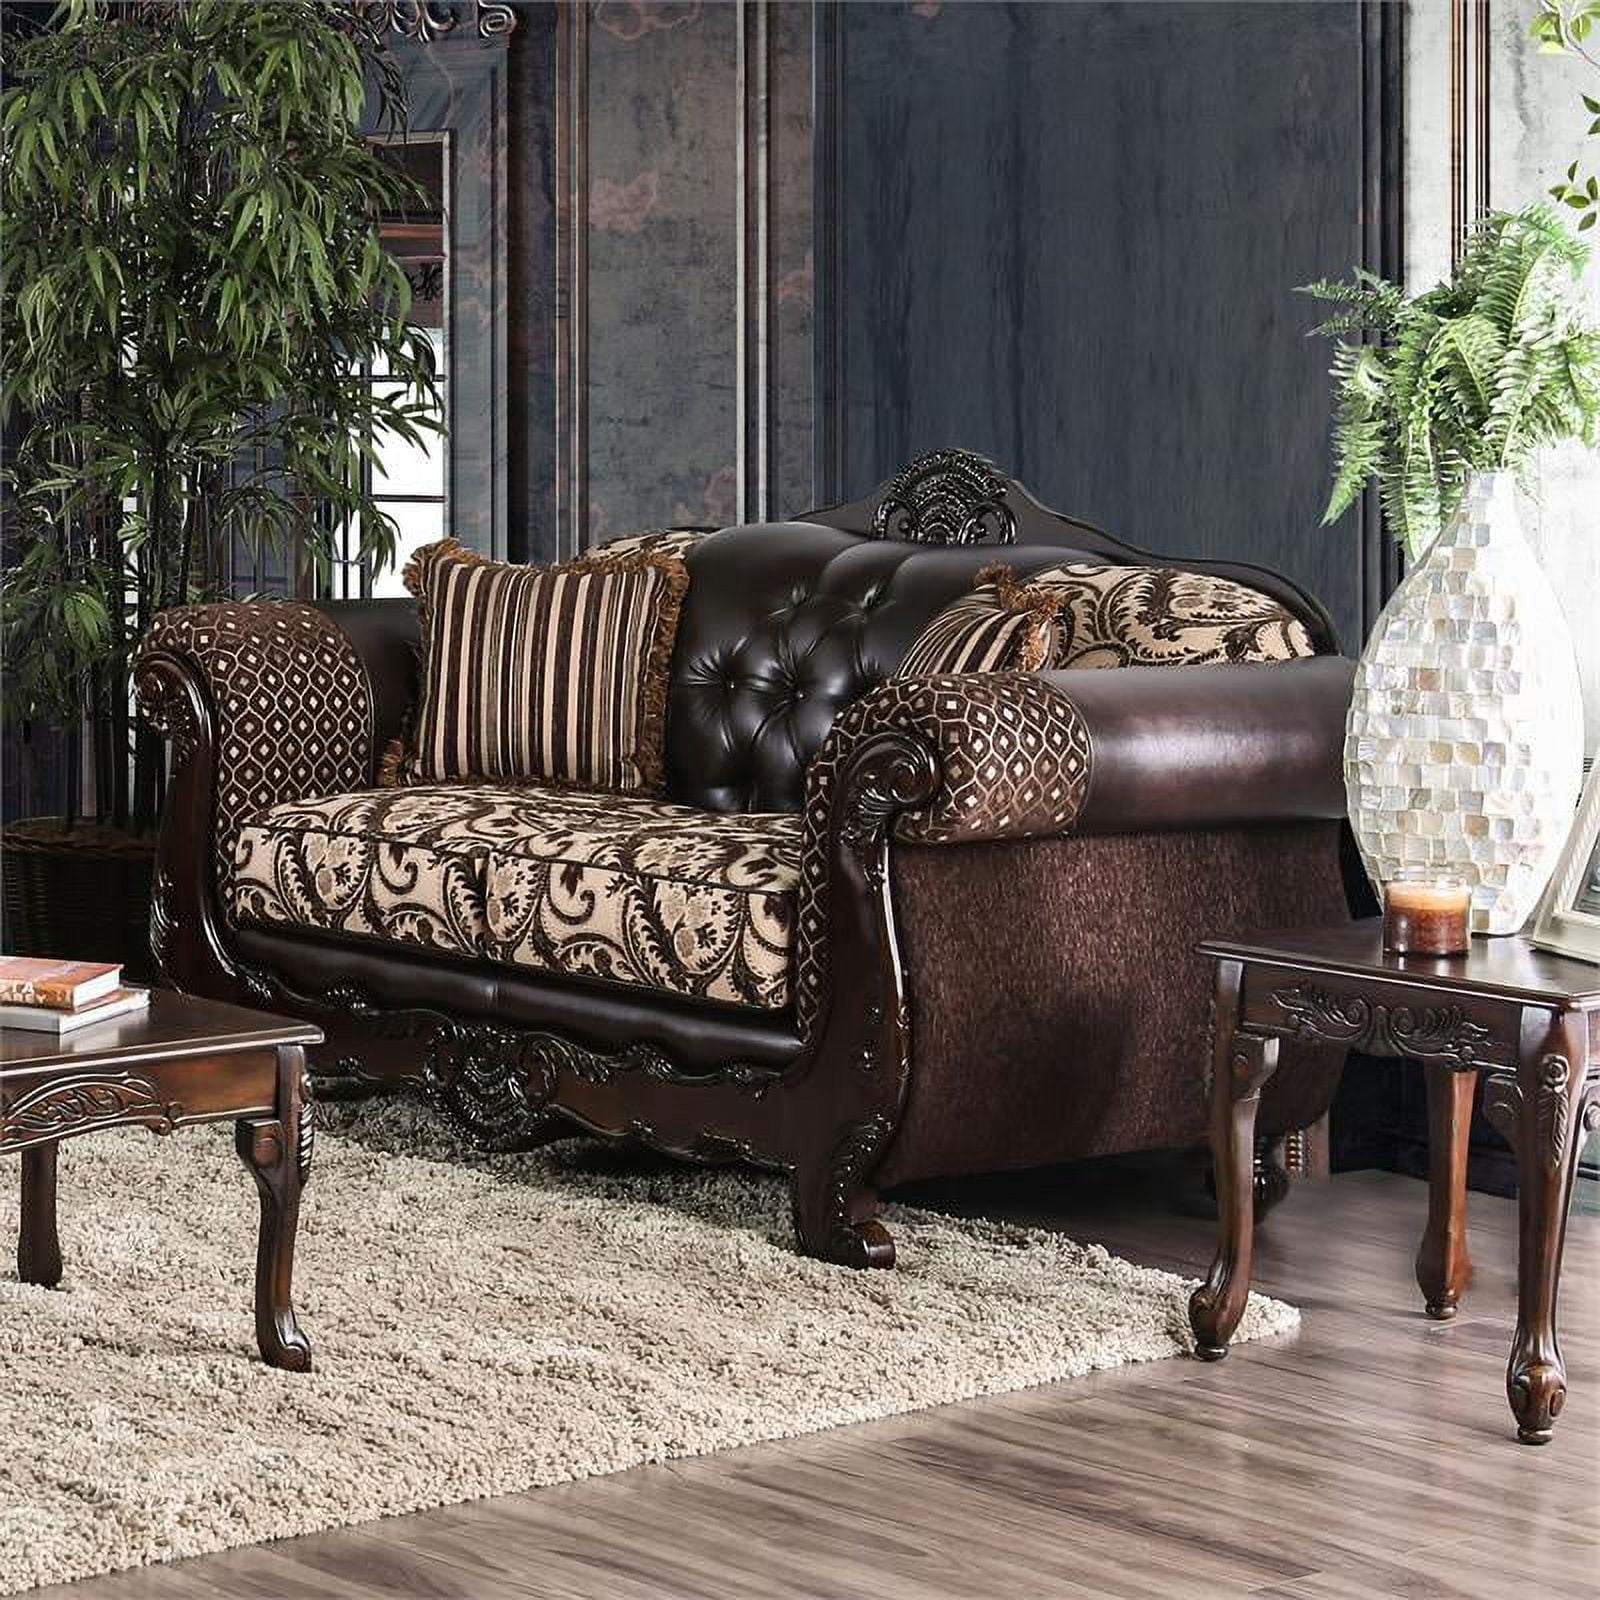 Furniture of America Chapmin 69.5 in. Dark Brown Faux Leather 2